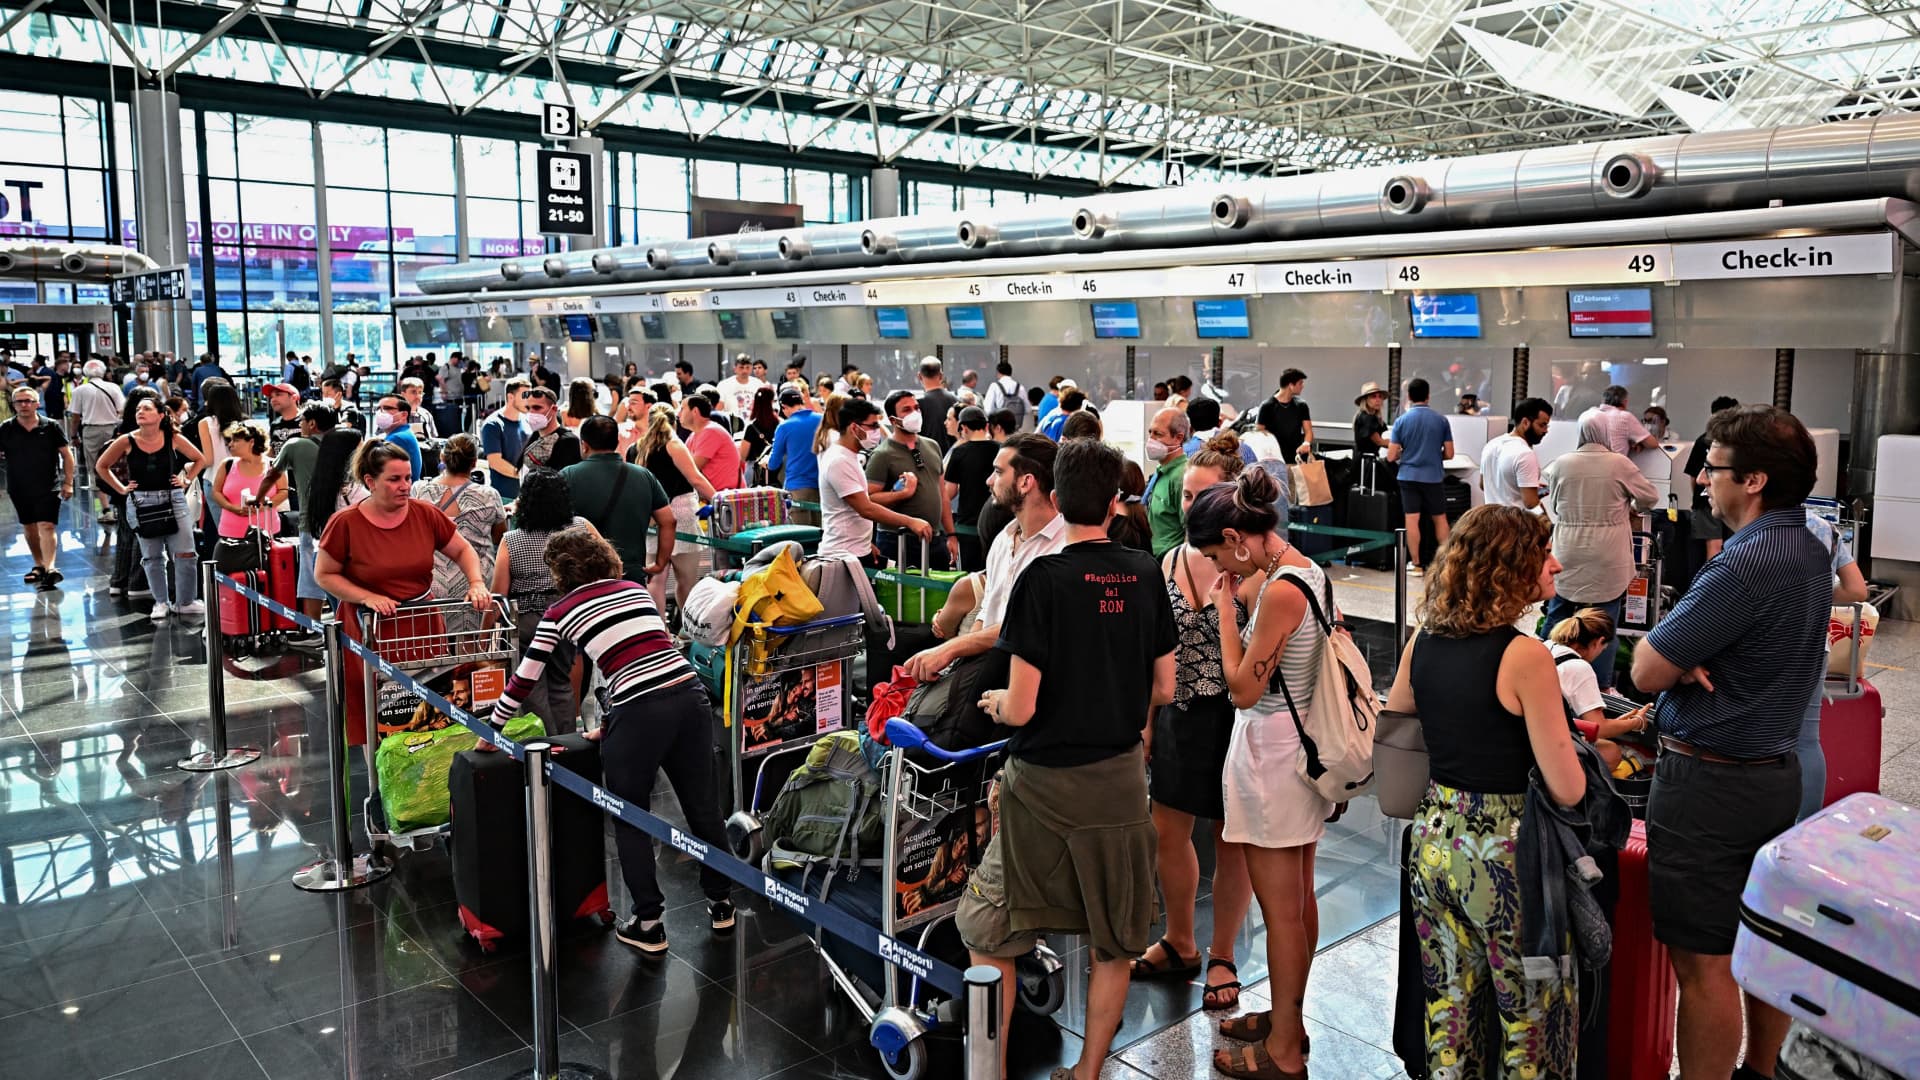 Flight cancellations, delays and staff walkouts became commonplace at many major airport in 2022 as airlines struggled to handle increased demand following staff layoffs.